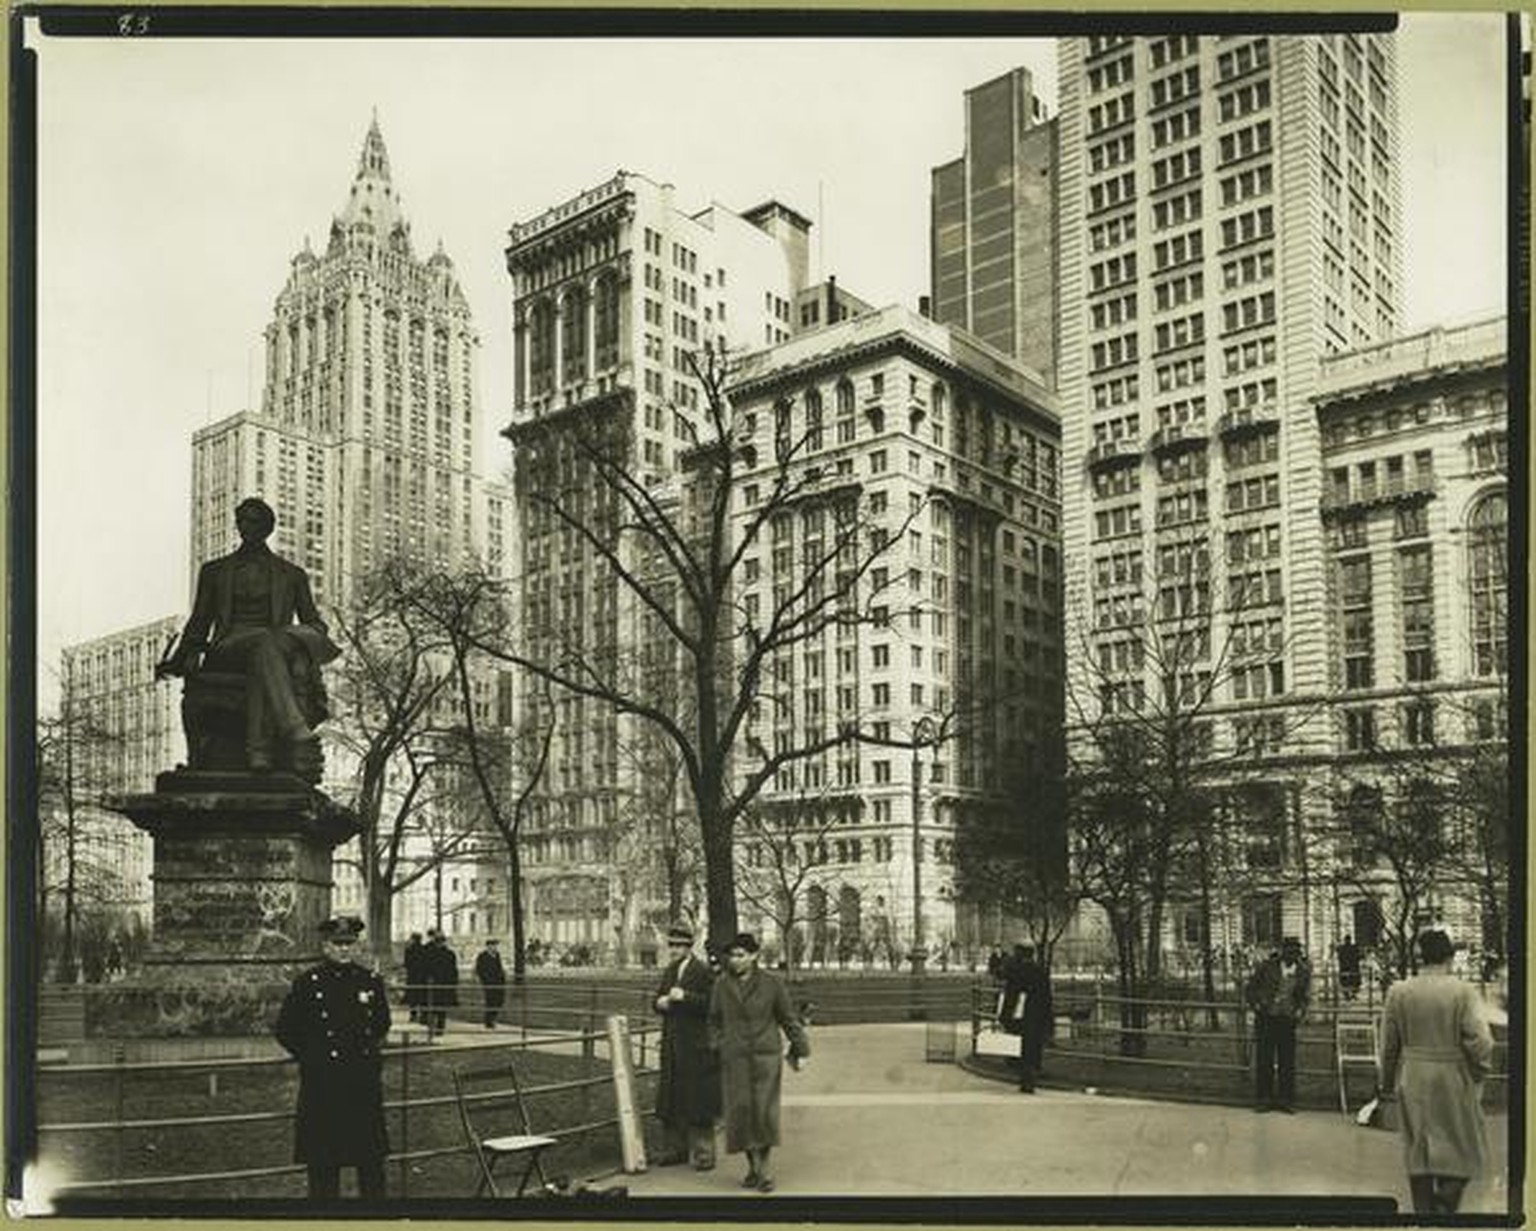 1936: The statue shows William H. Seward, who was Secretary of State from 1861 until 1869.